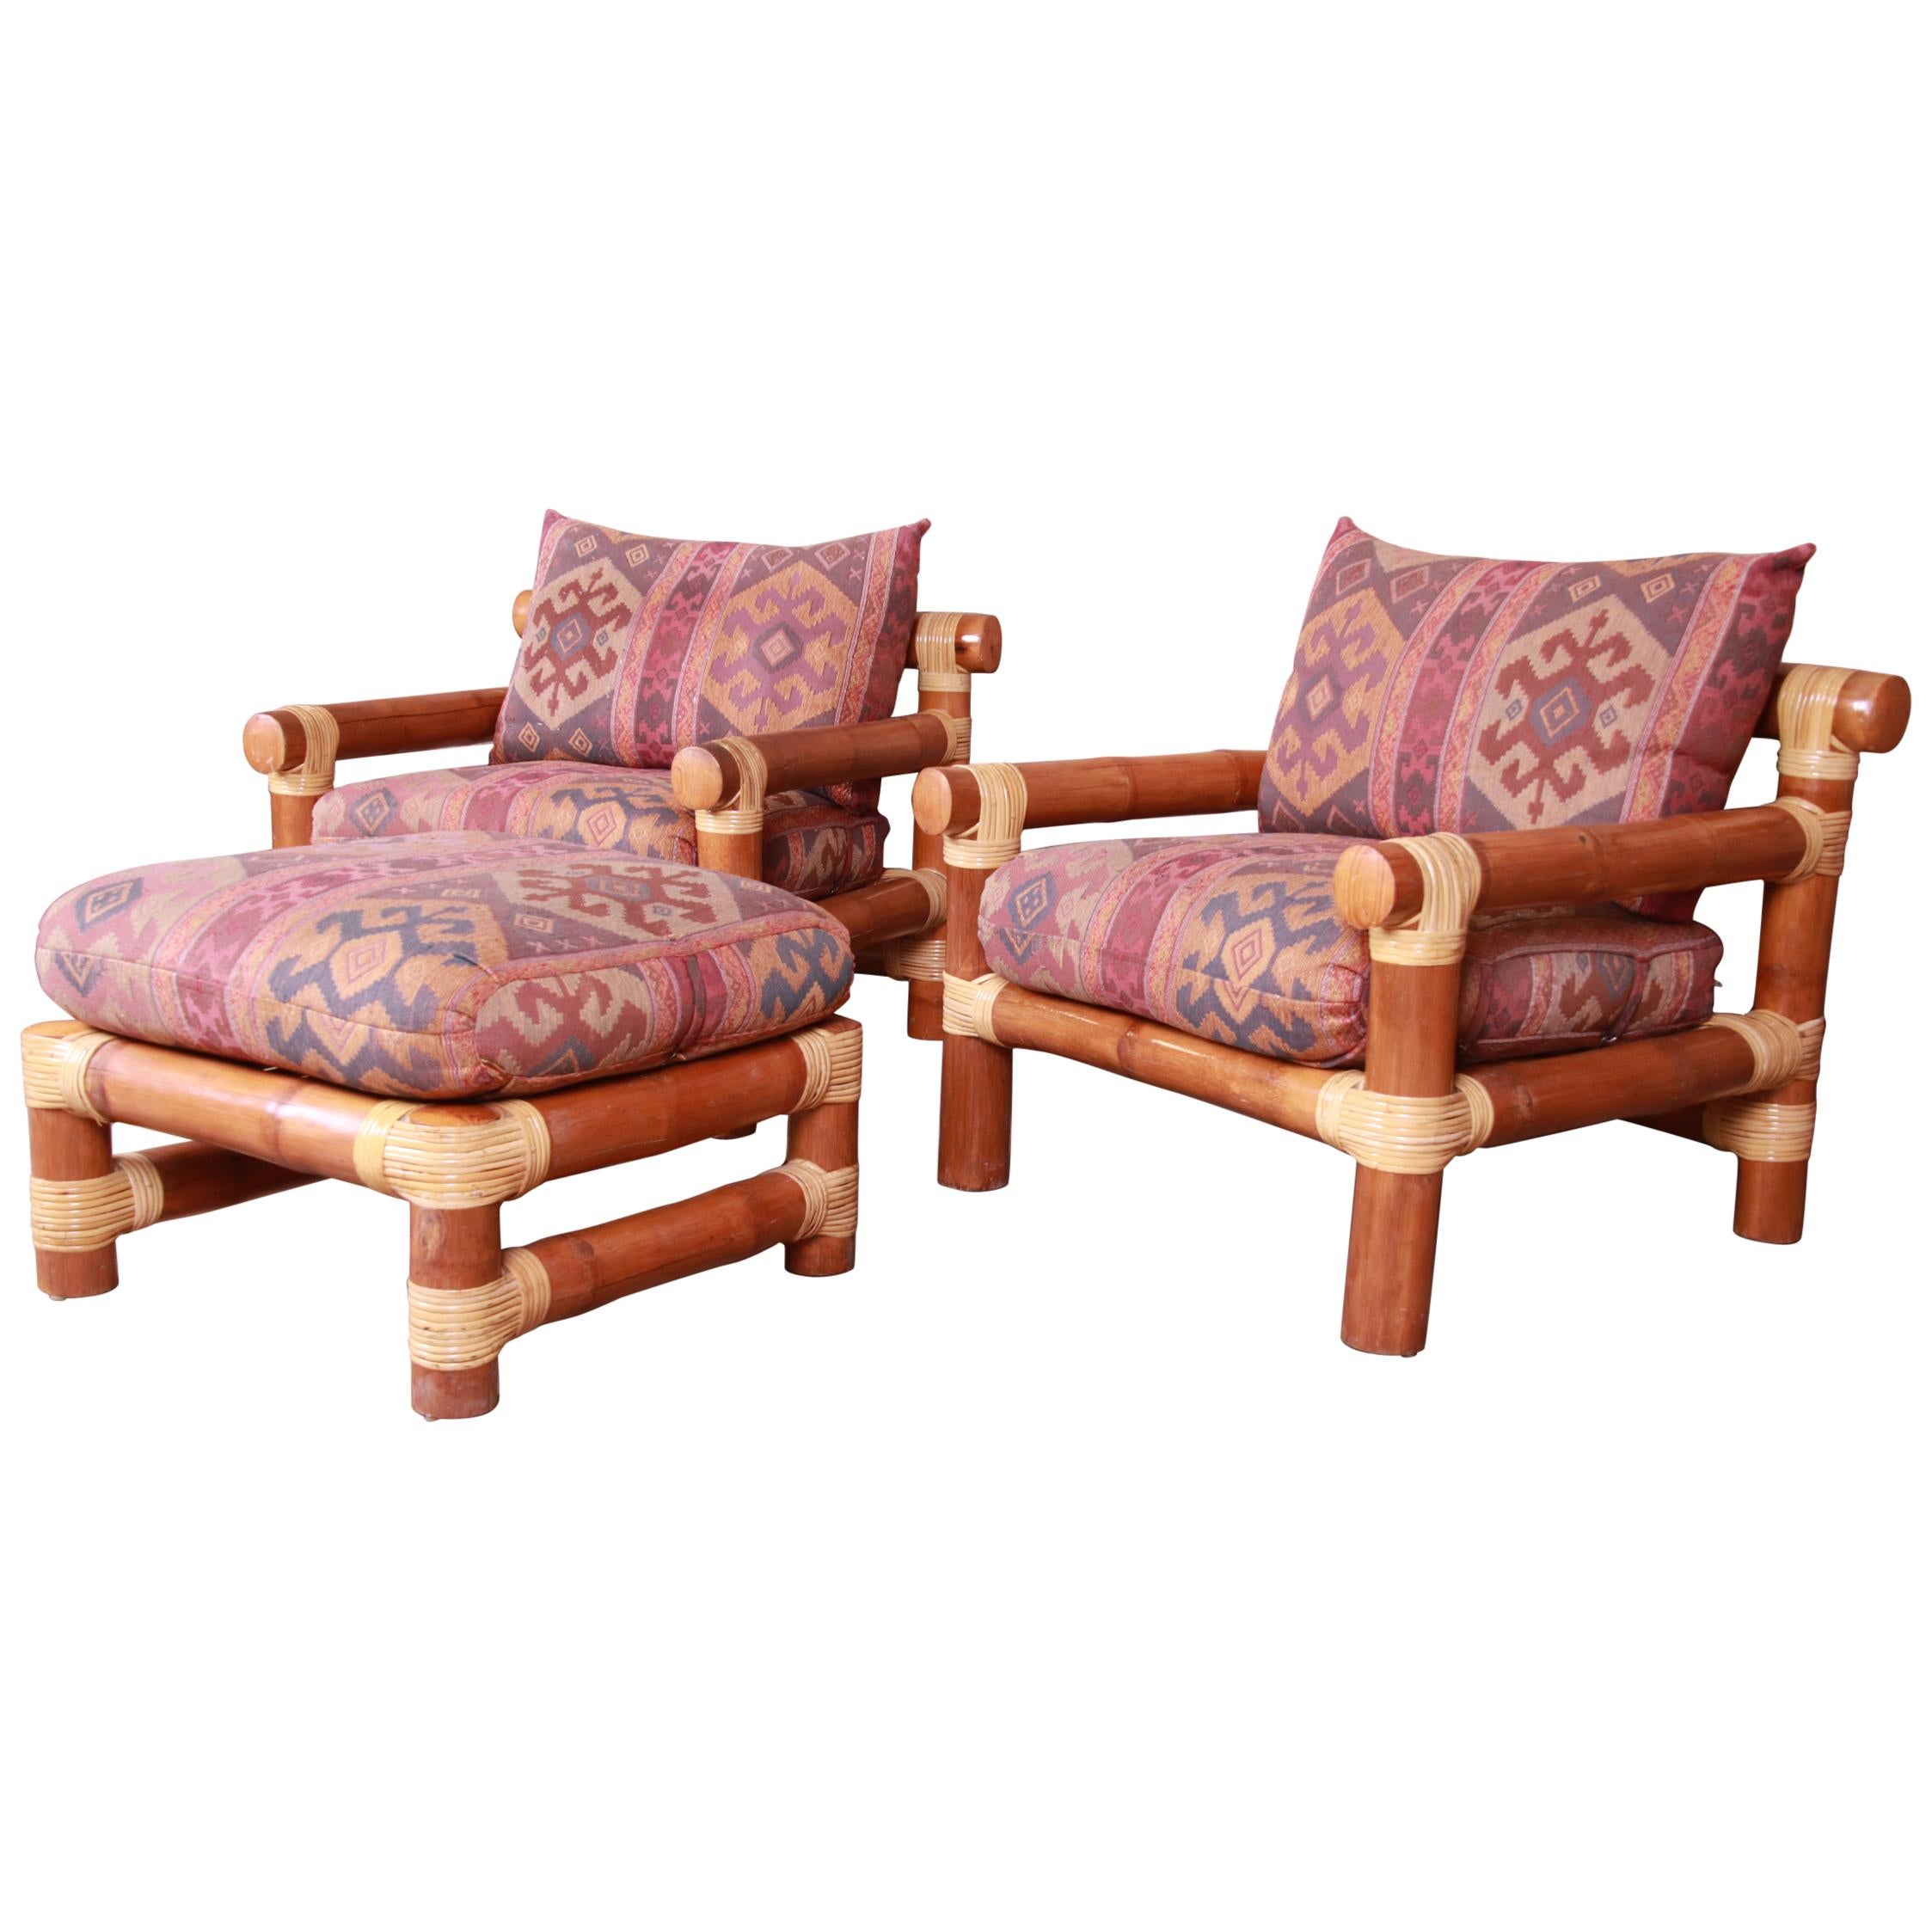 Oversized Bamboo Rattan Lounge Chairs and Ottoman